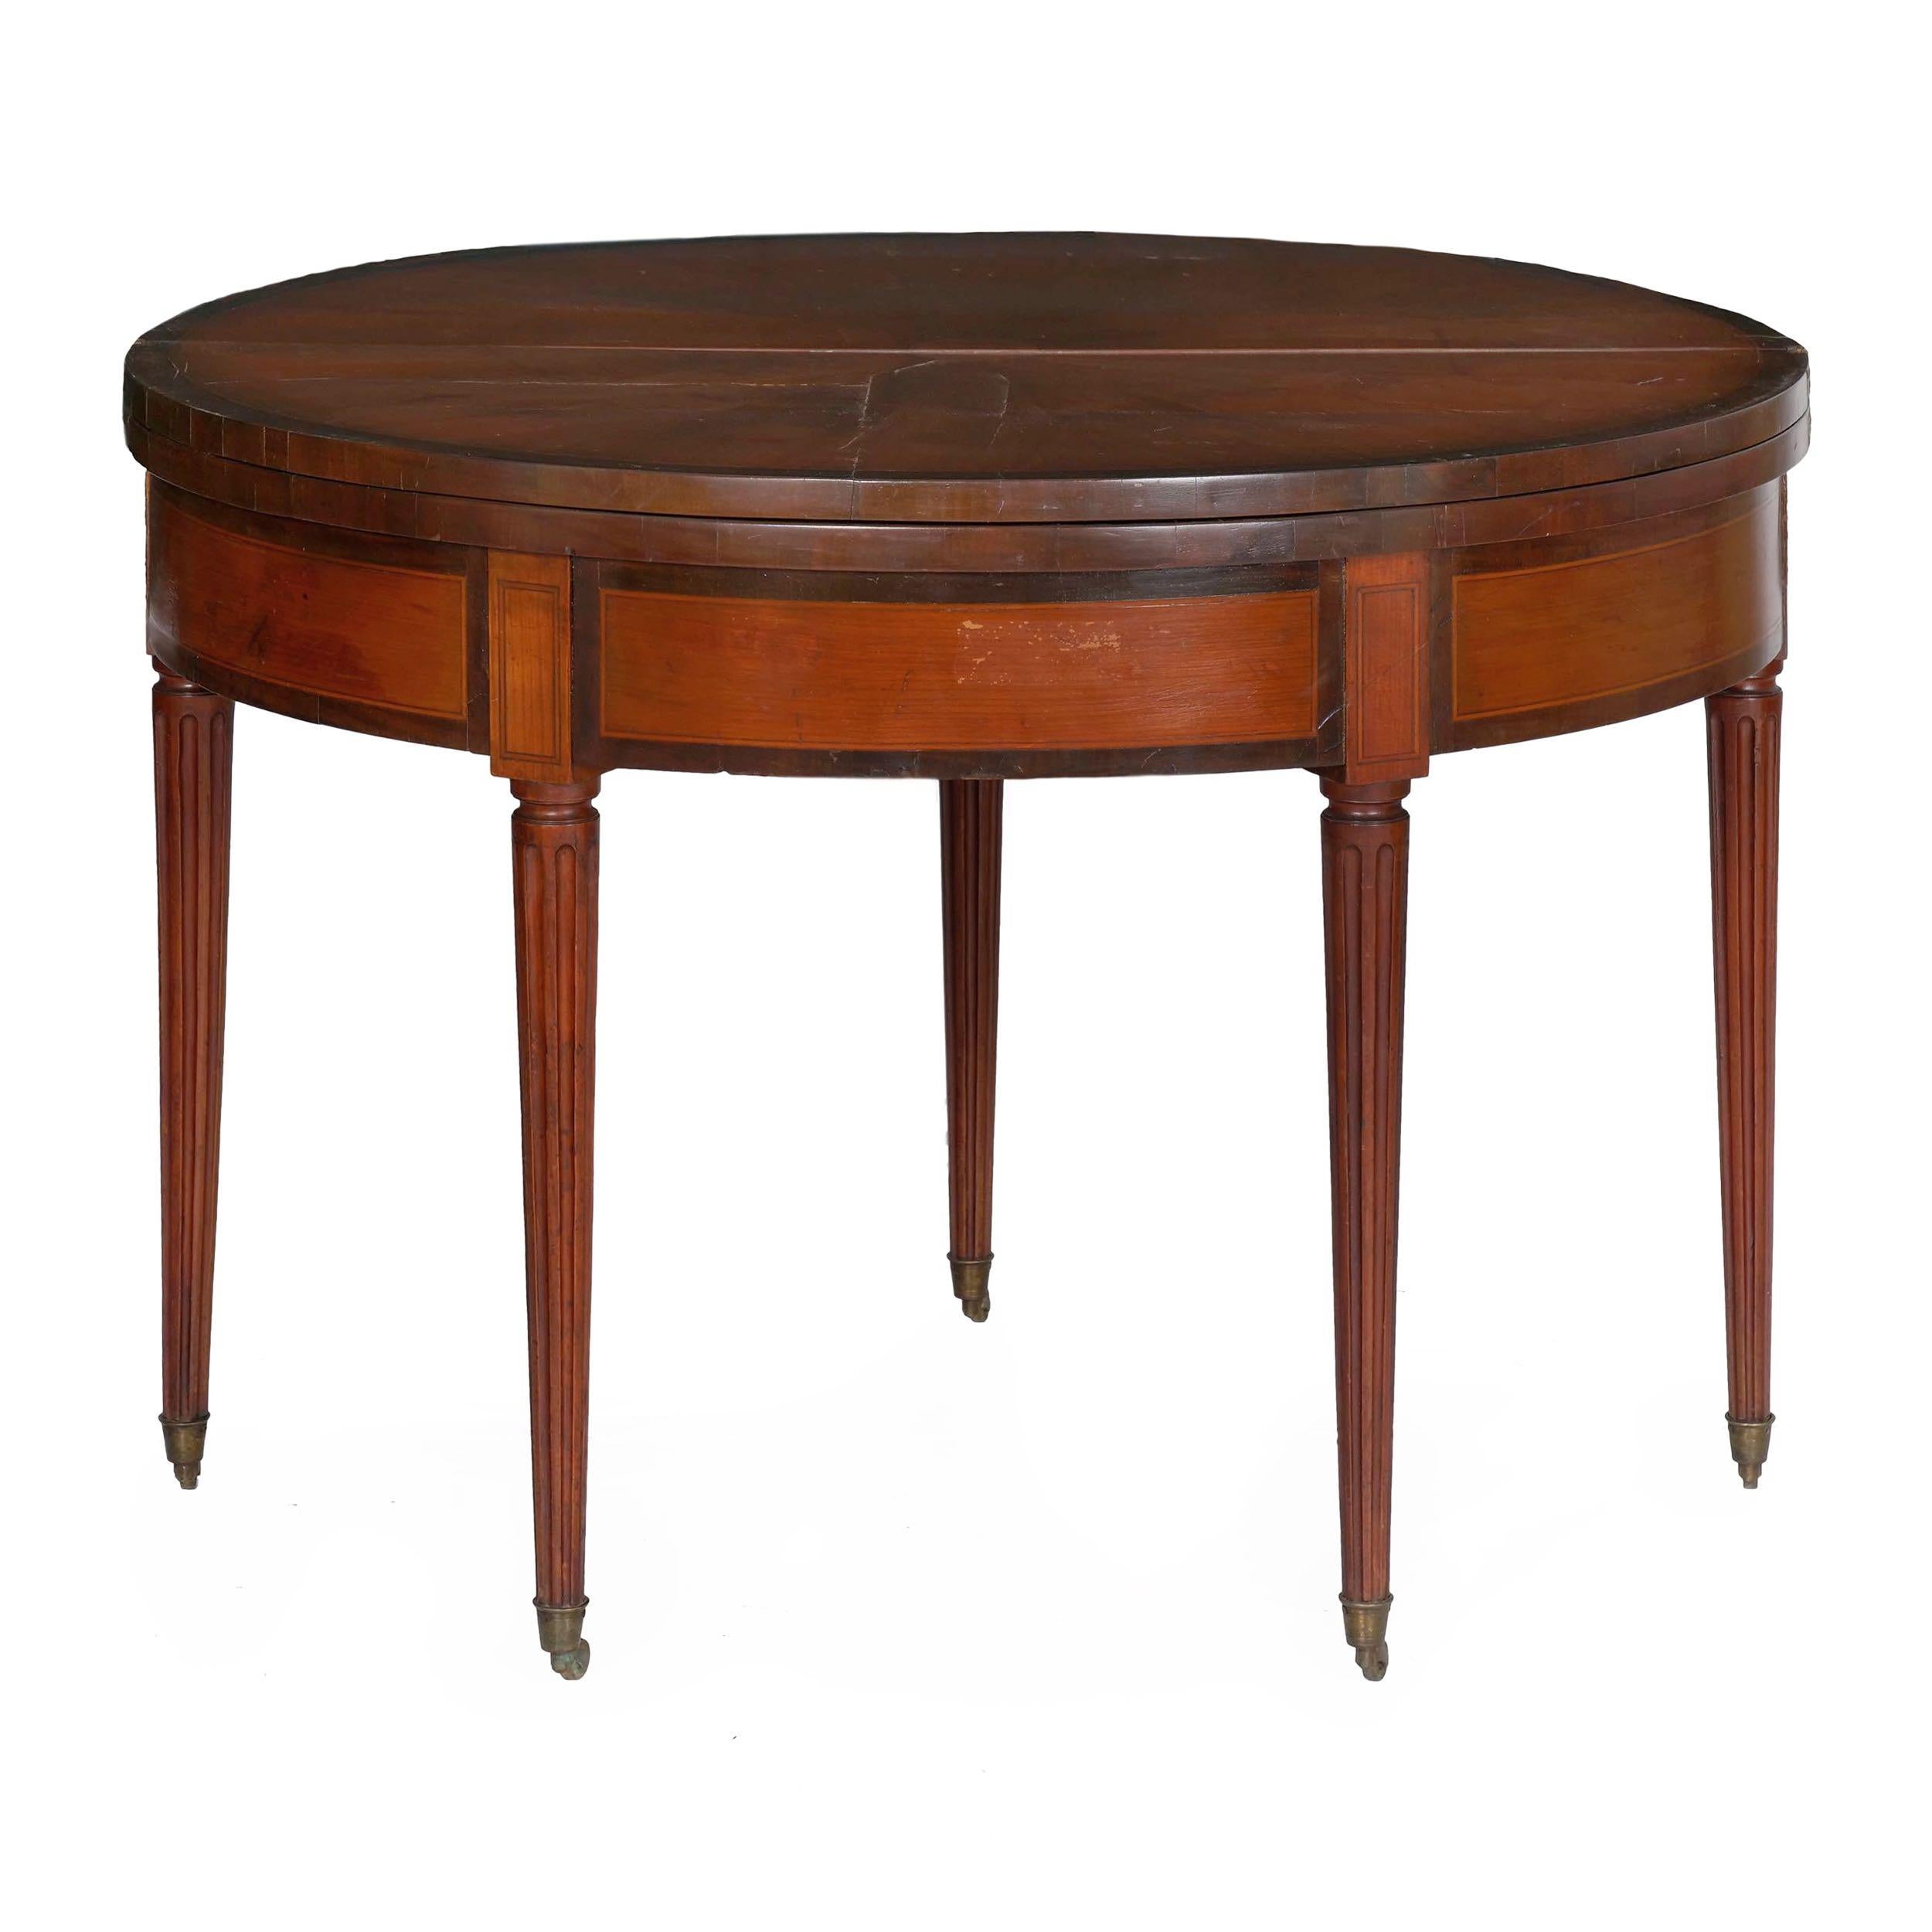 An interesting table for its sheer versatility, this delightful table is first a console in demilune form, second opening up to a perfect circle as a games table and finally opening once again into a card table with a green baize playing surface.